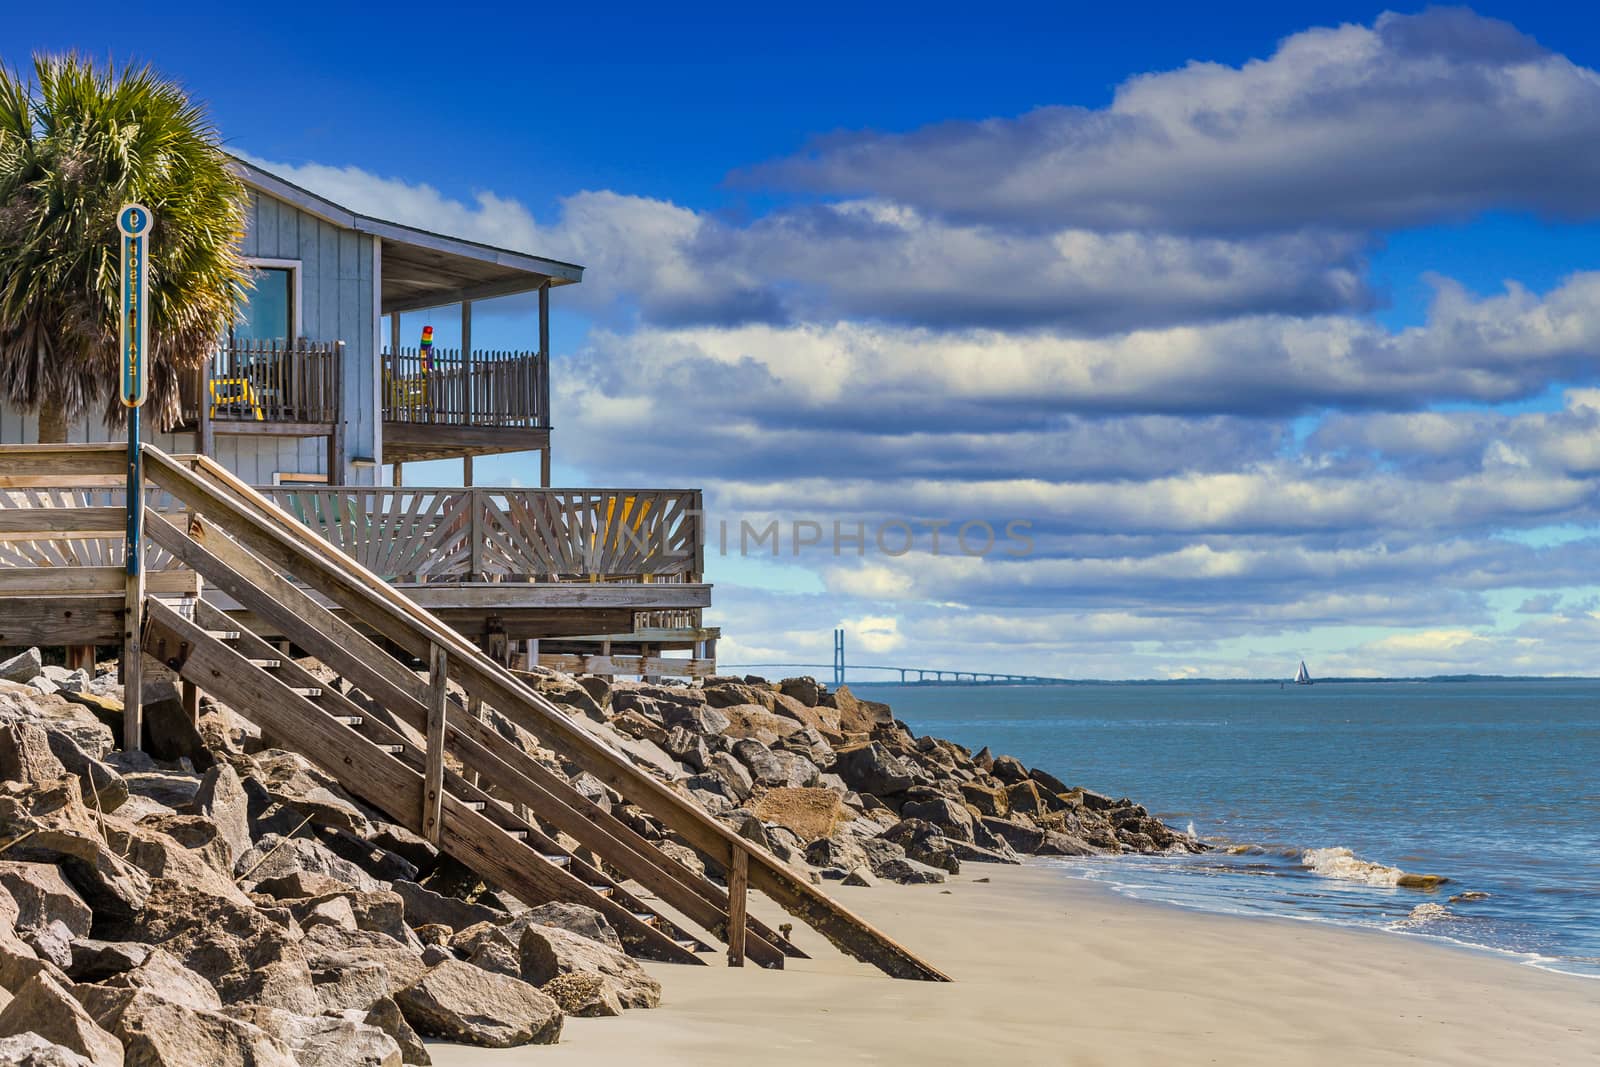 A nice house on the beach with walkway into the sand and a suspension bridge in the background